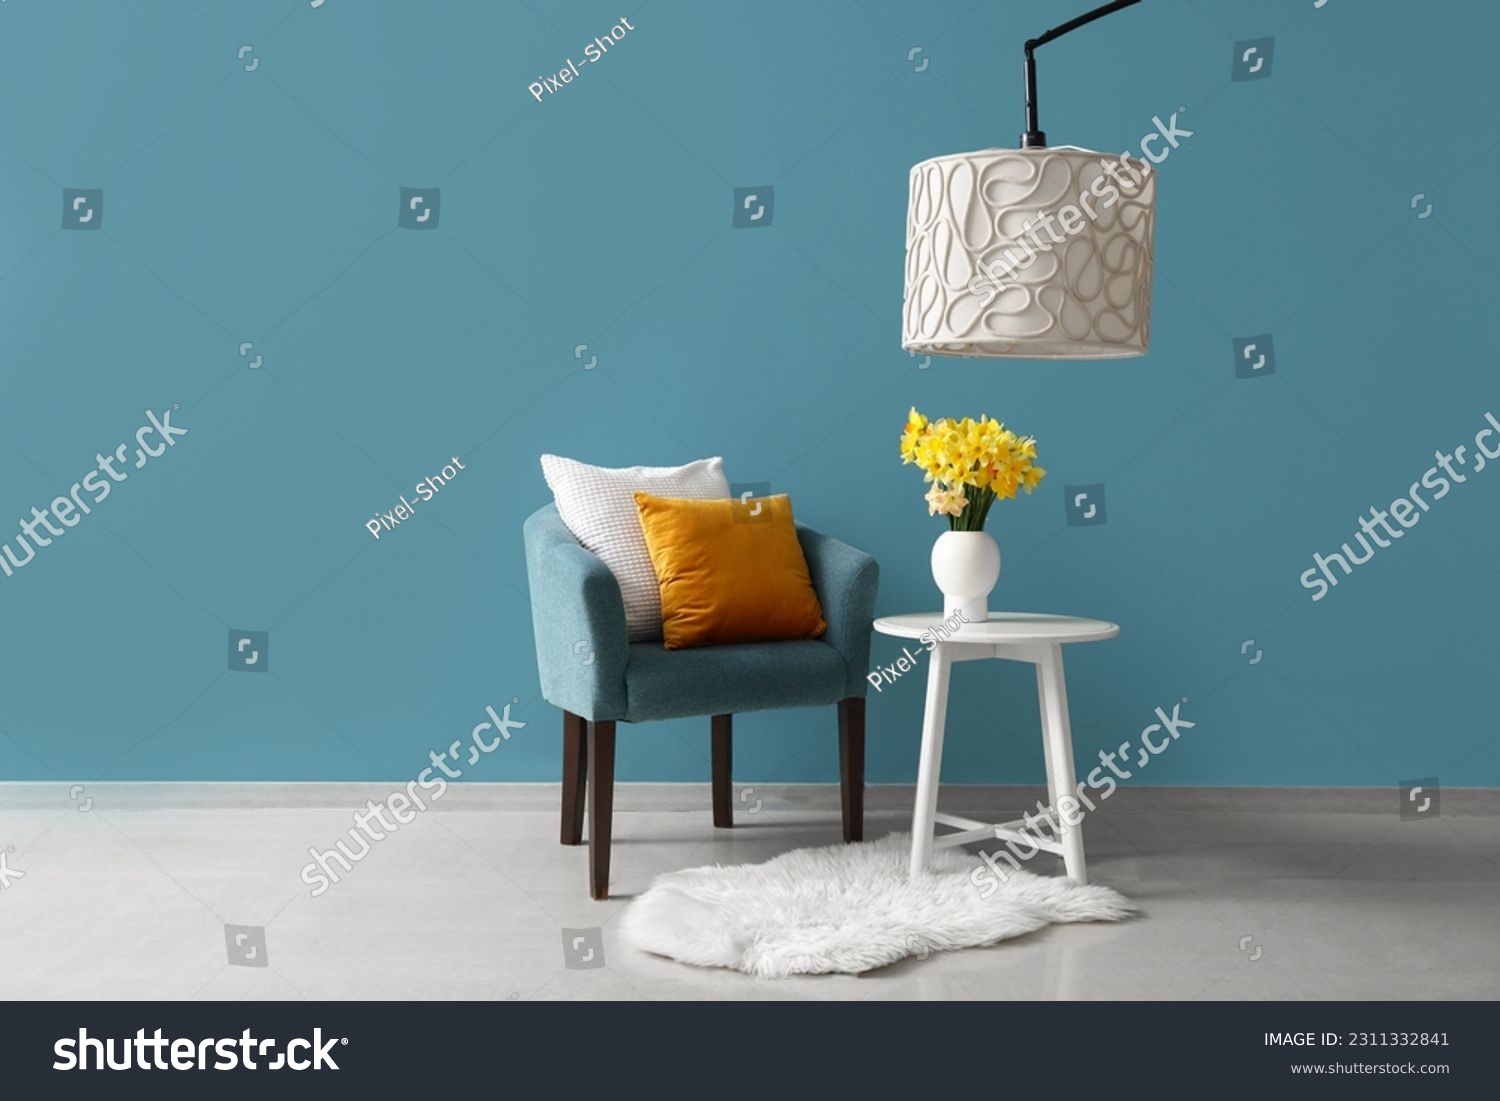 Cozy armchair with cushions and blooming narcissus flowers on coffee table near blue wall #2311332841